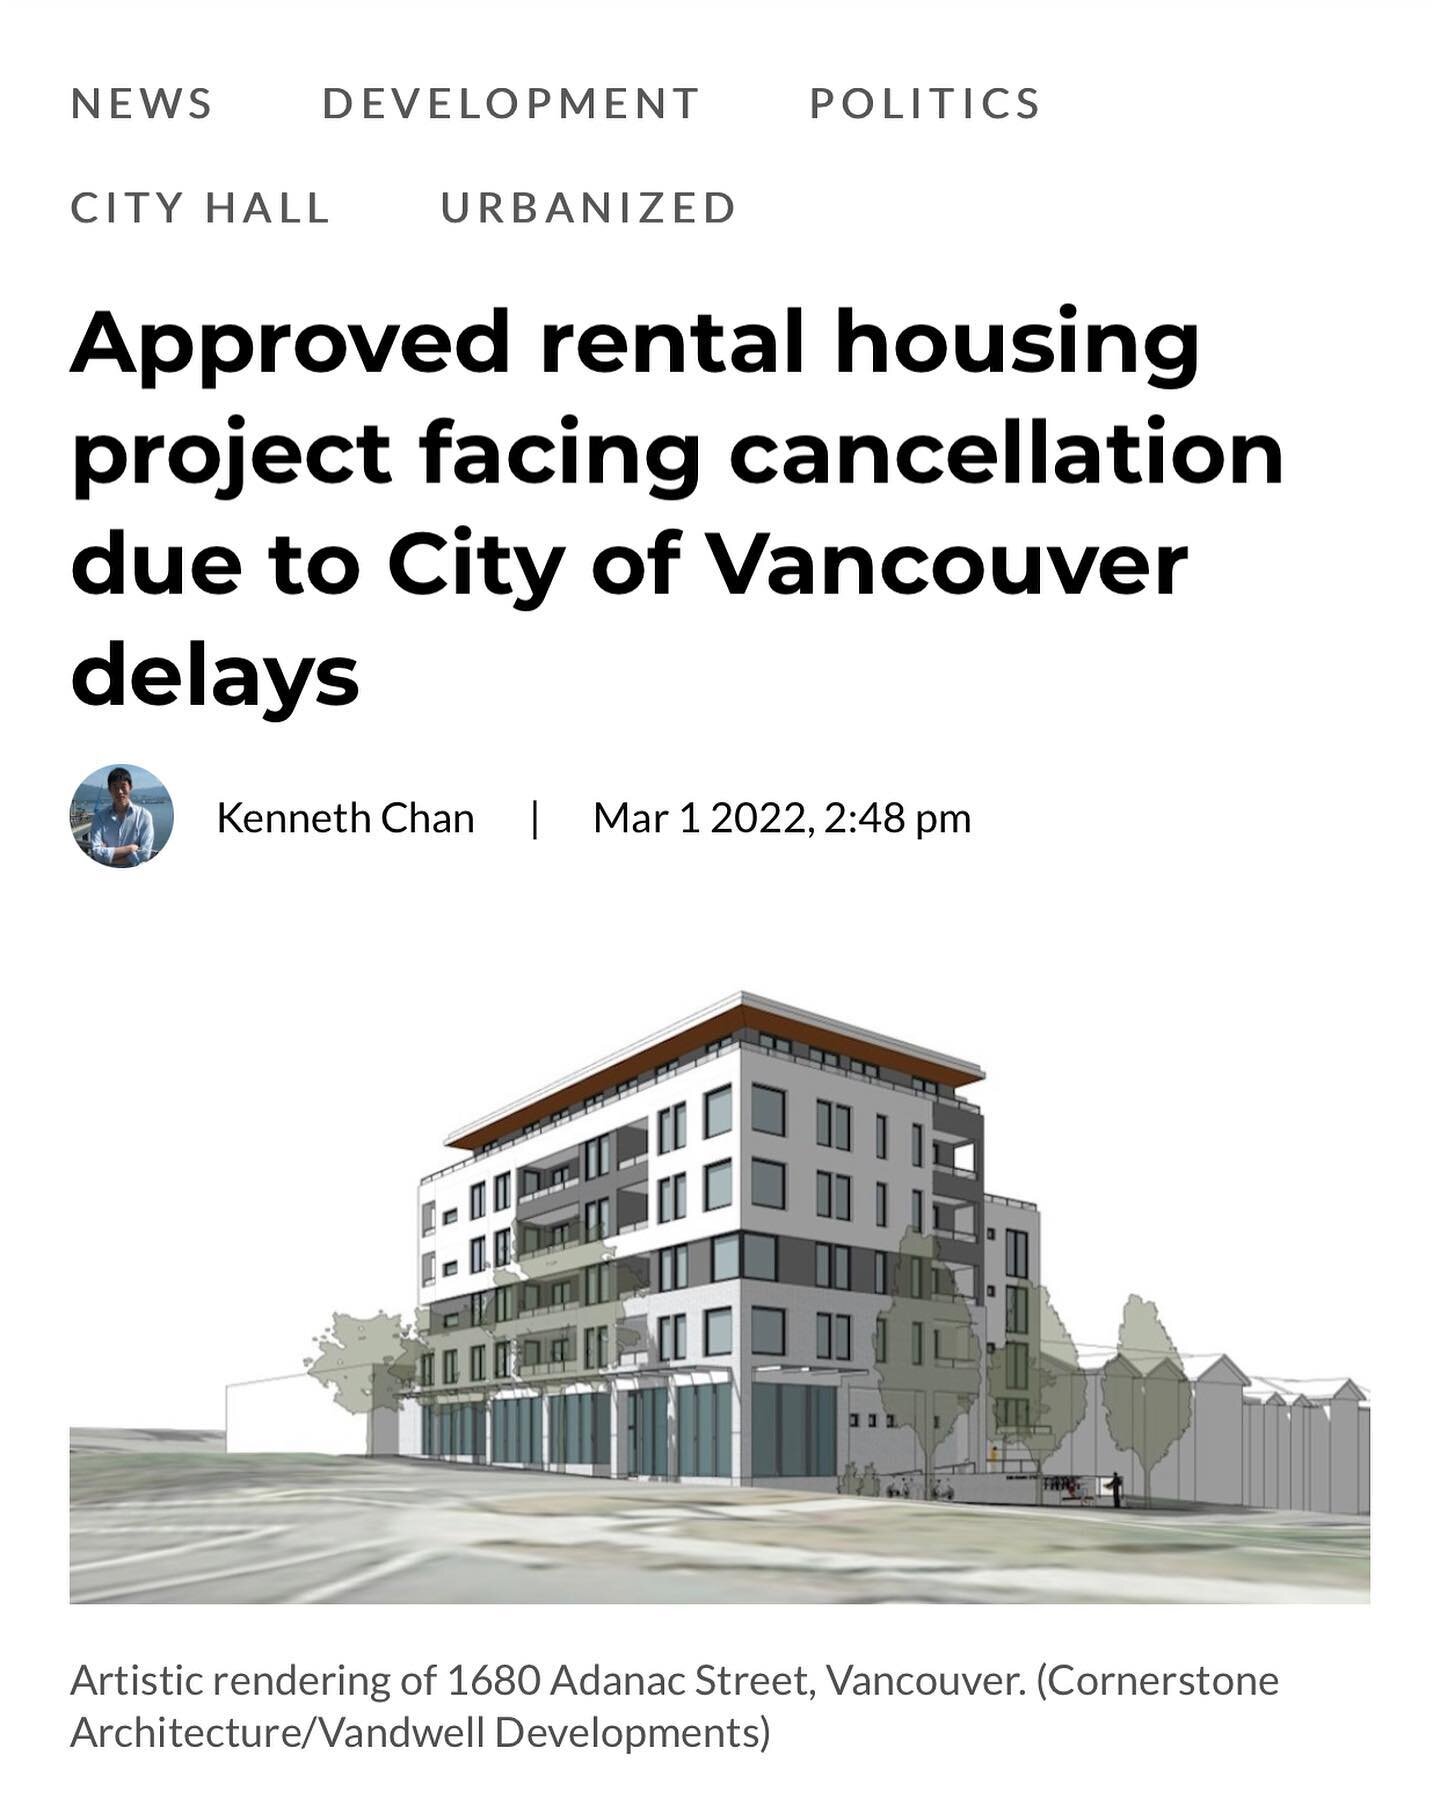 Friends and family, I am speaking at Council today about my rental project. I could use your support please share this article with your networks. Thank you! Link in bio